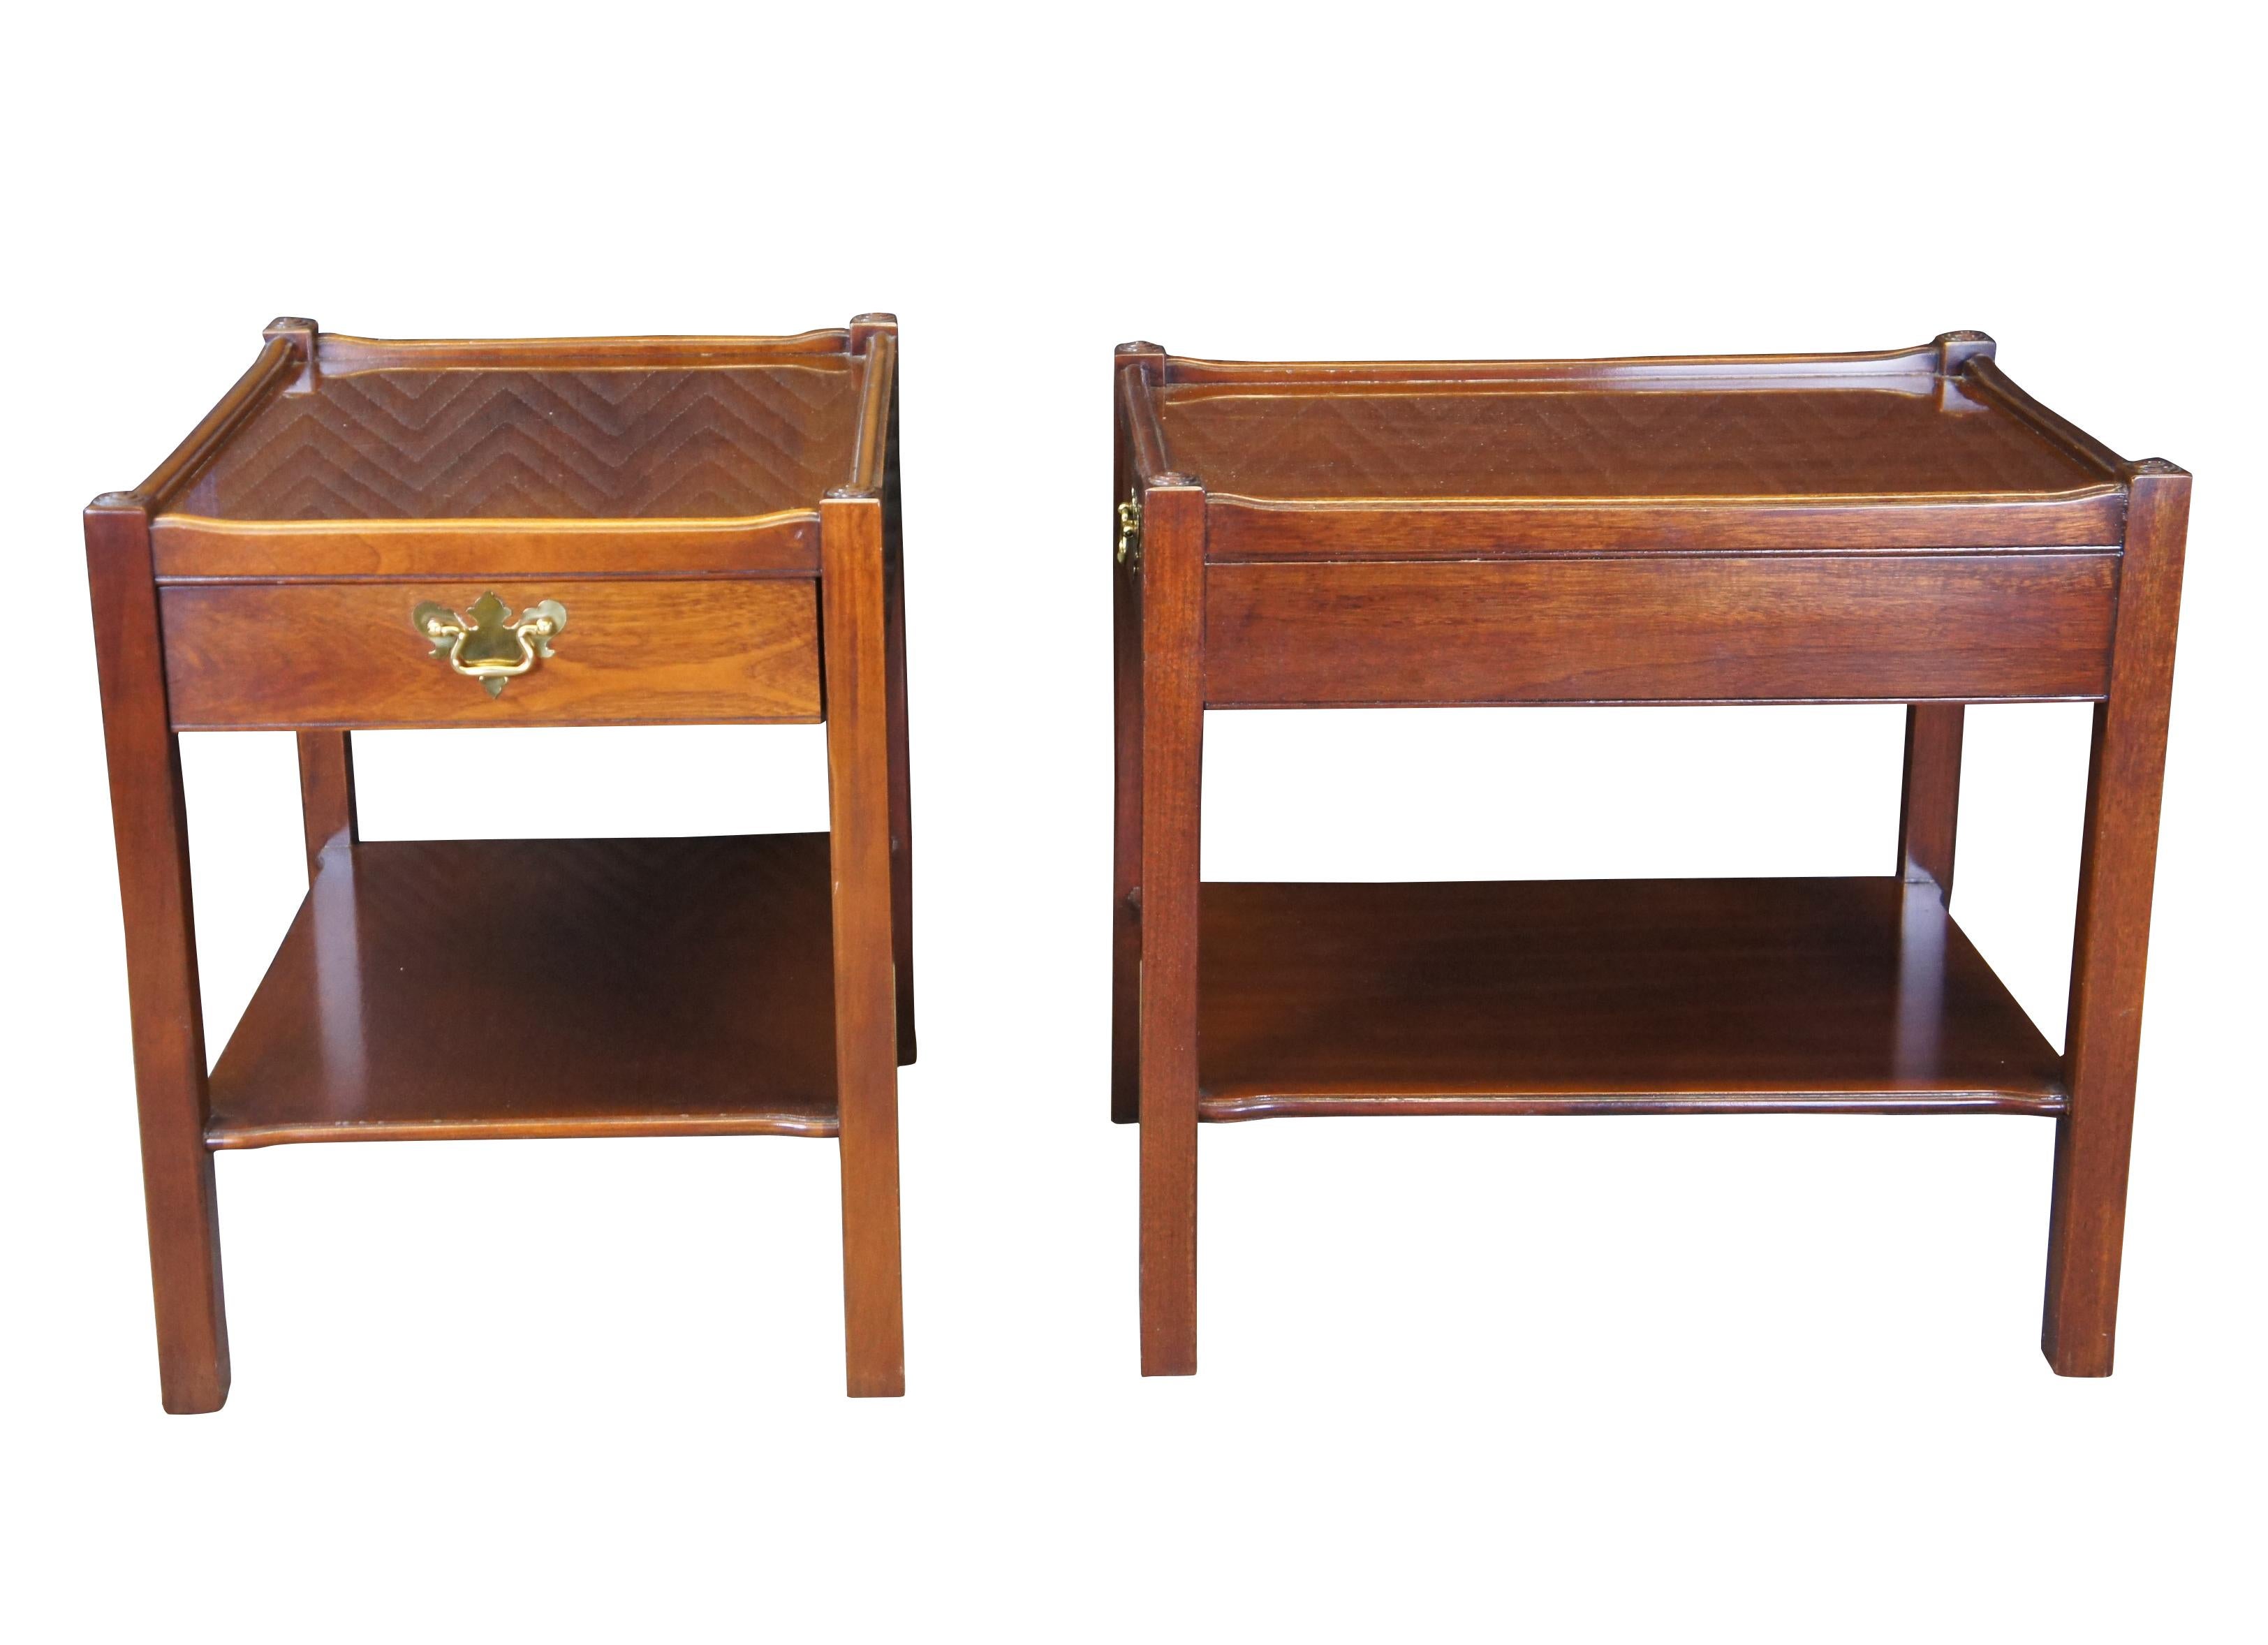 2 Hickory Chair Historic James River Collection side tables, circa 1996.  Inspired by English & Georgian styling.  A rectangular inset top made from mahogany with an oak dovetailed drawer with brass batwing hardware and lower shelf.  The tables are